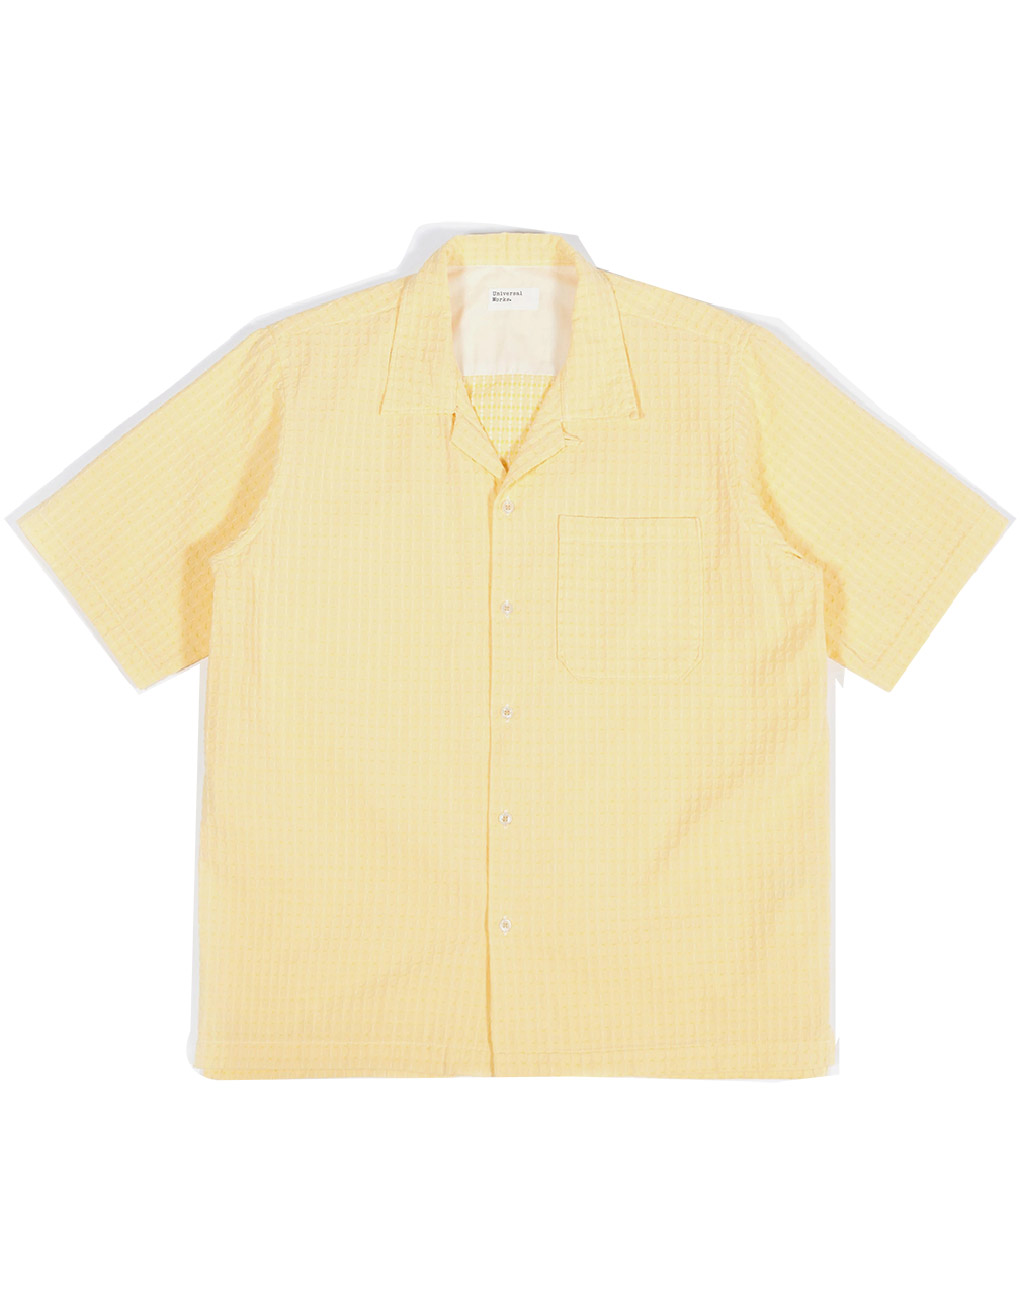 Universal Works – Camp shirt in yellow delos cotton